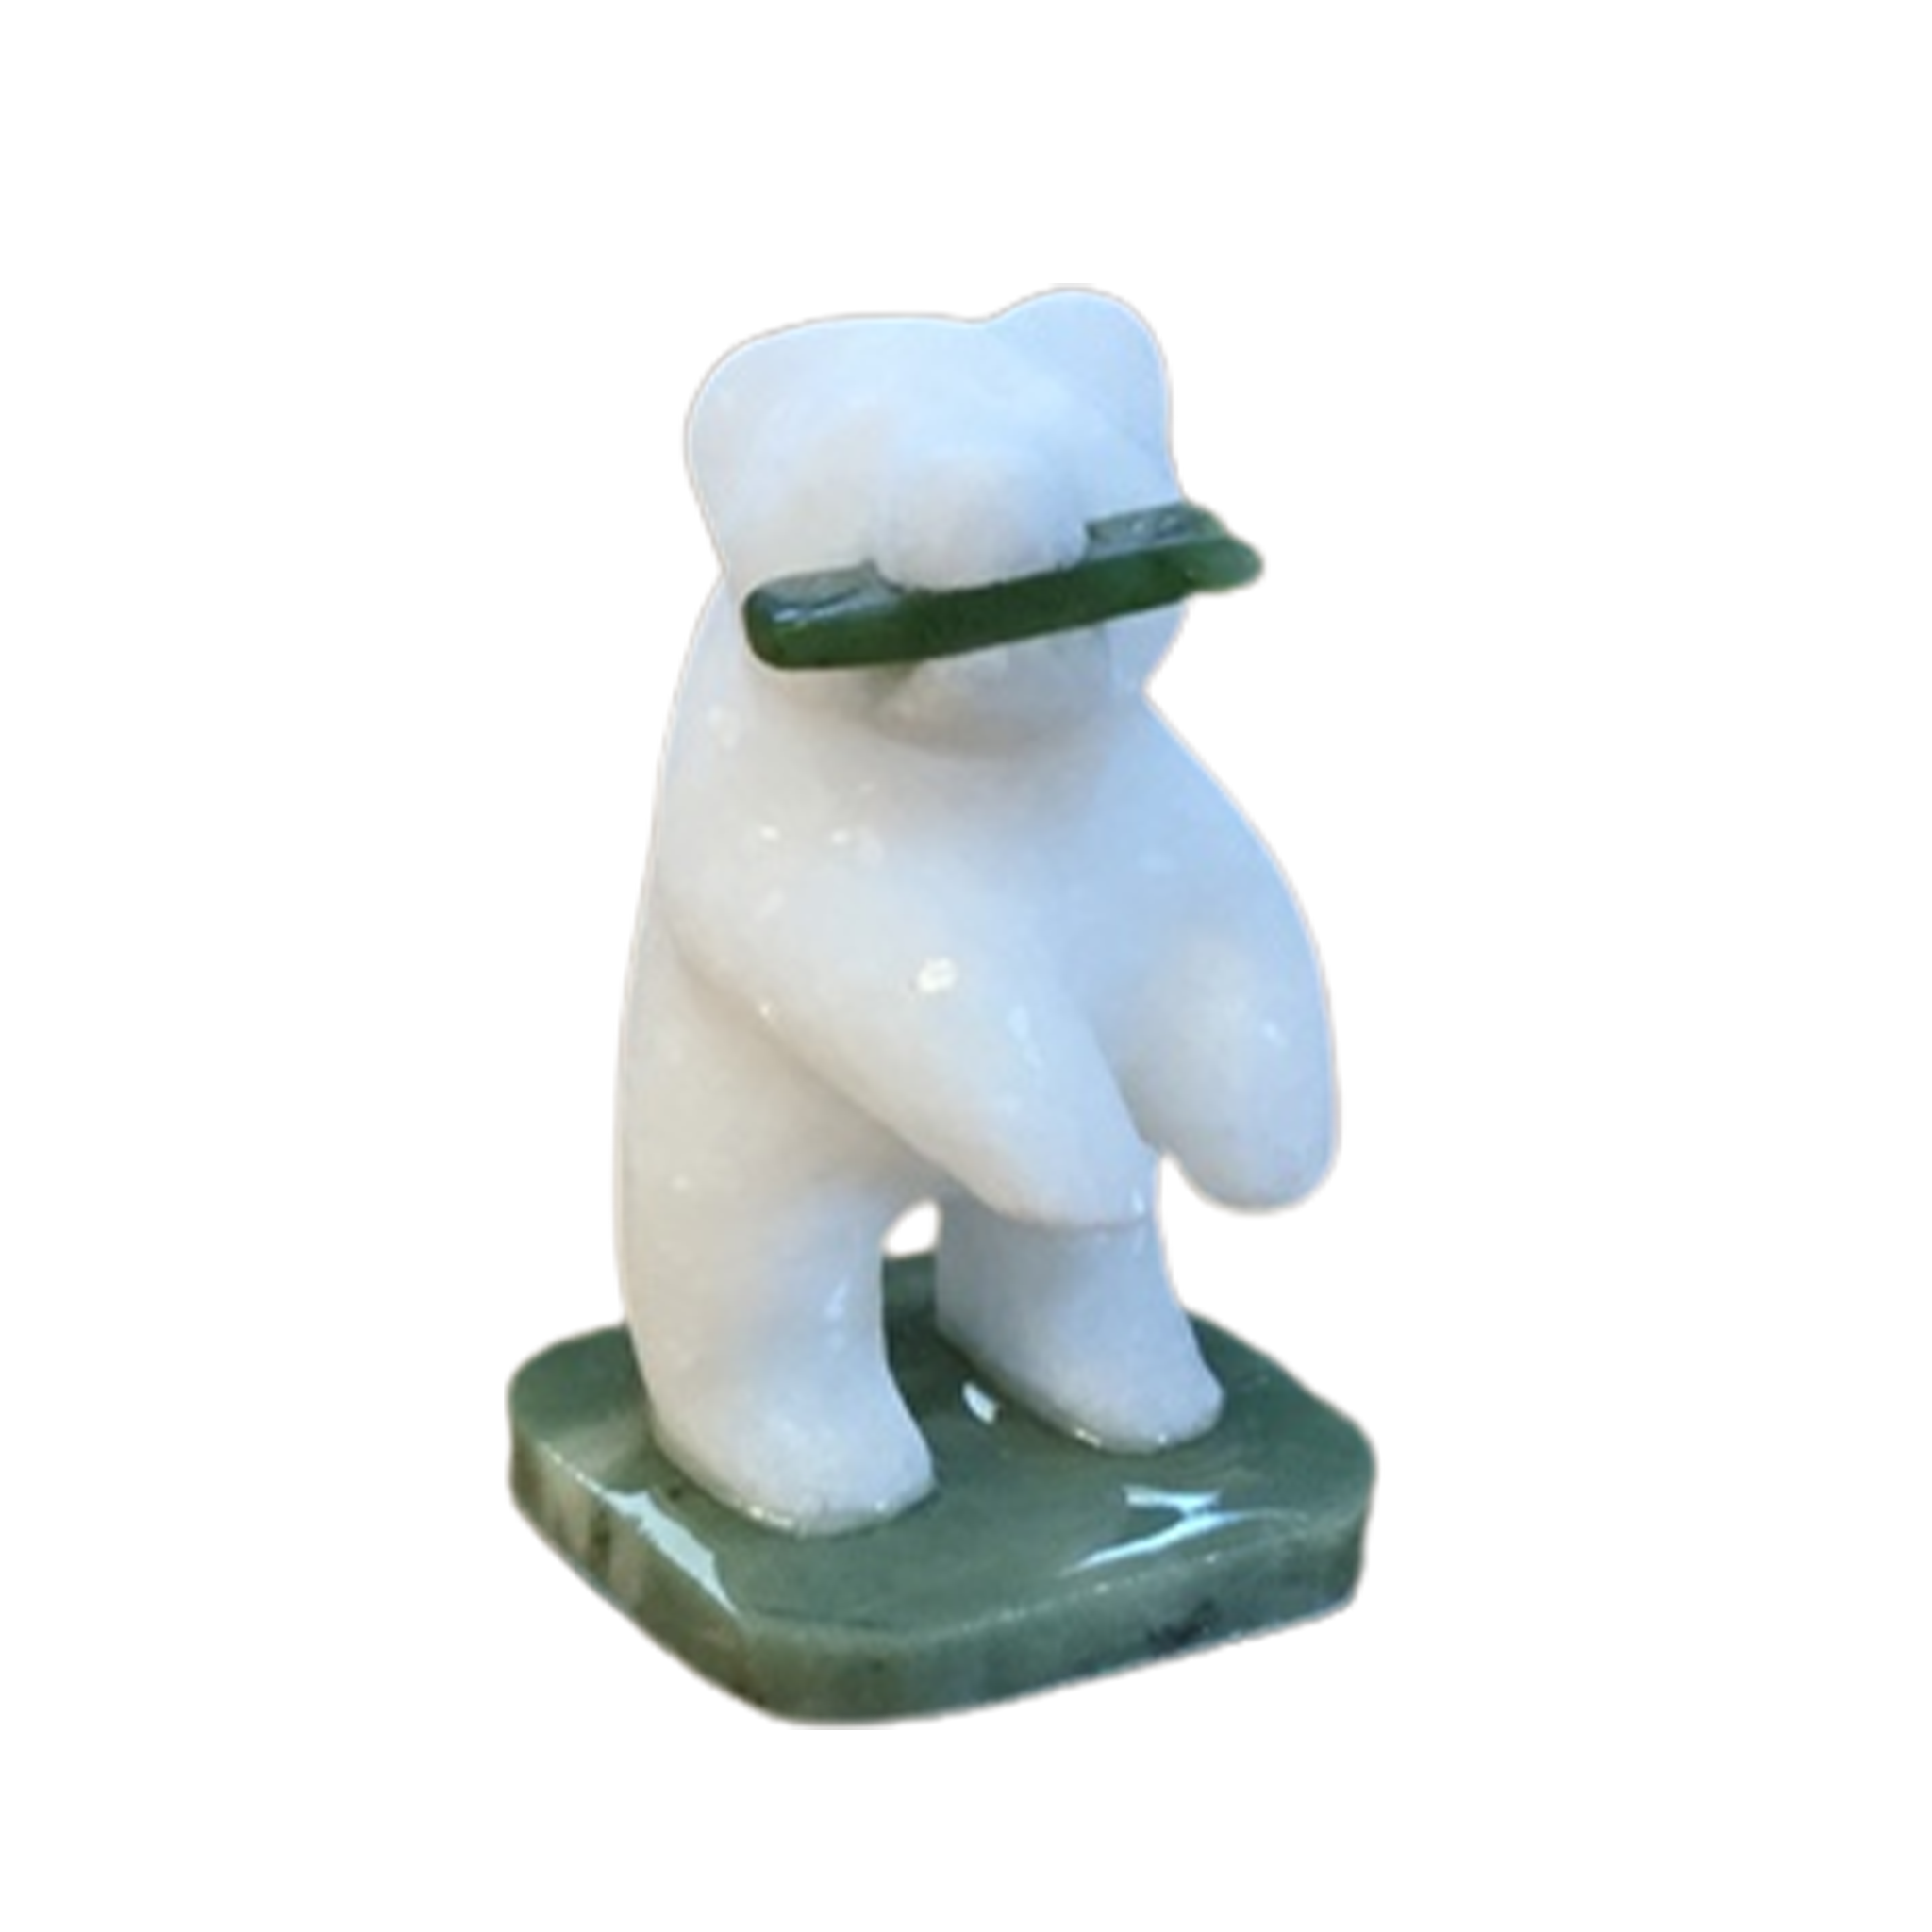 STAR MARBLE Bear Standing with Fish, 2"